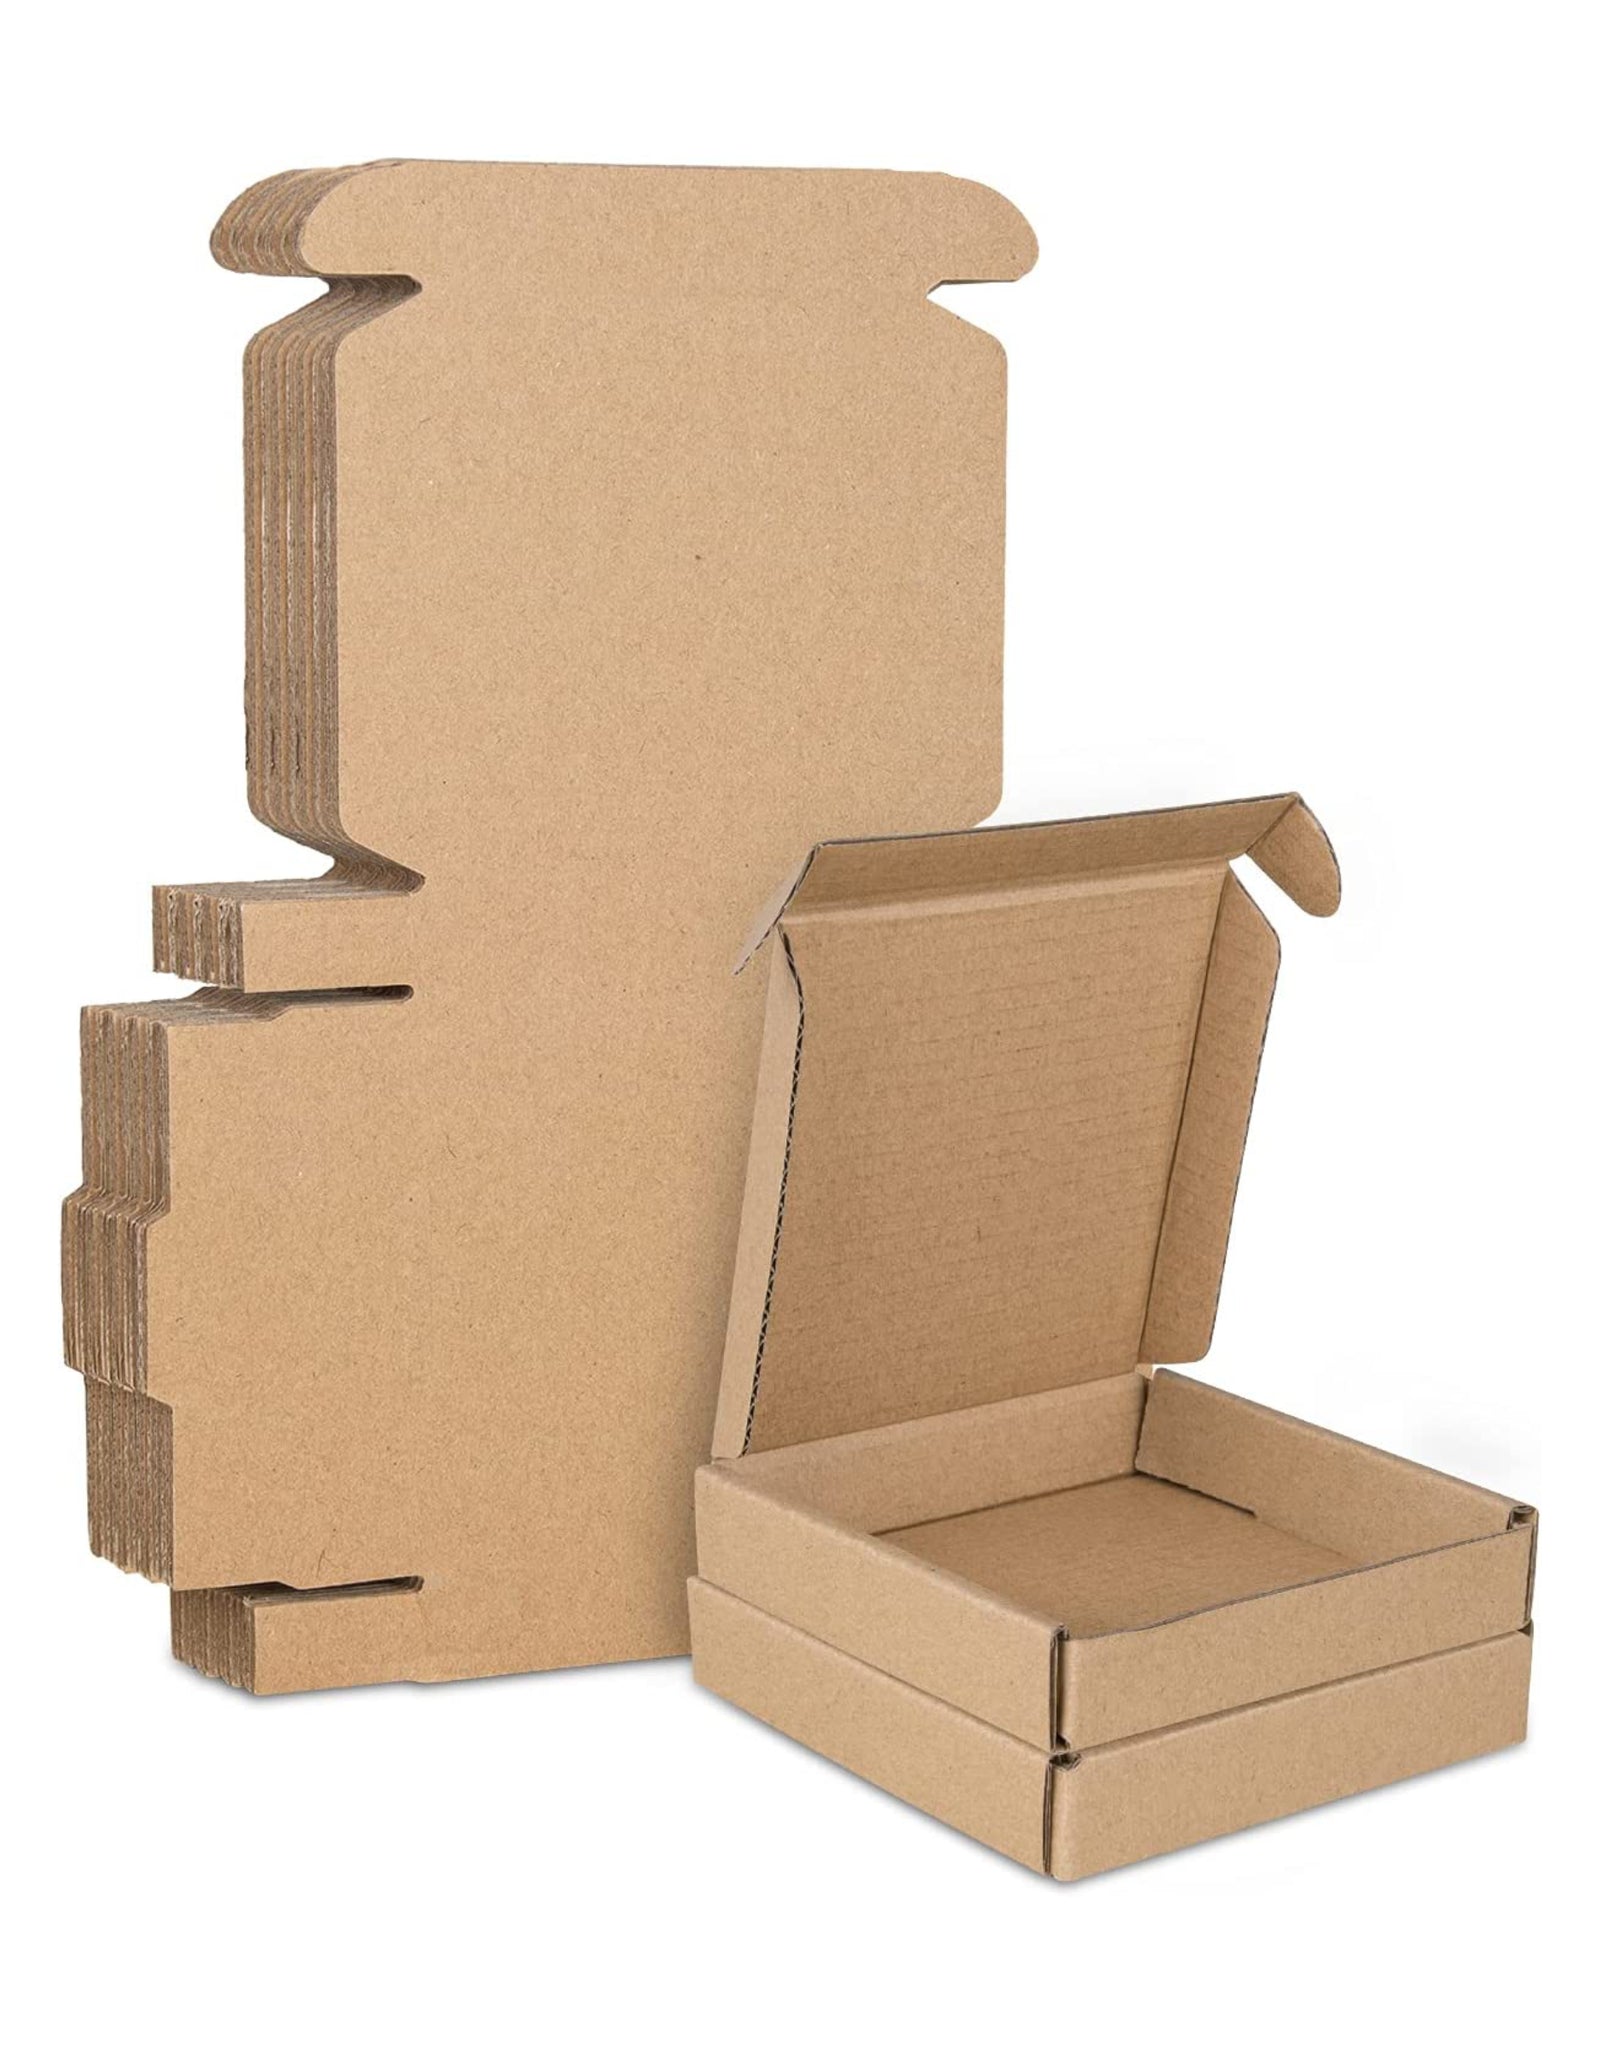 c5 cardboard boxes, a5 cardboard boxes, c5 royal mail large letter box, c5 pip postal boxes